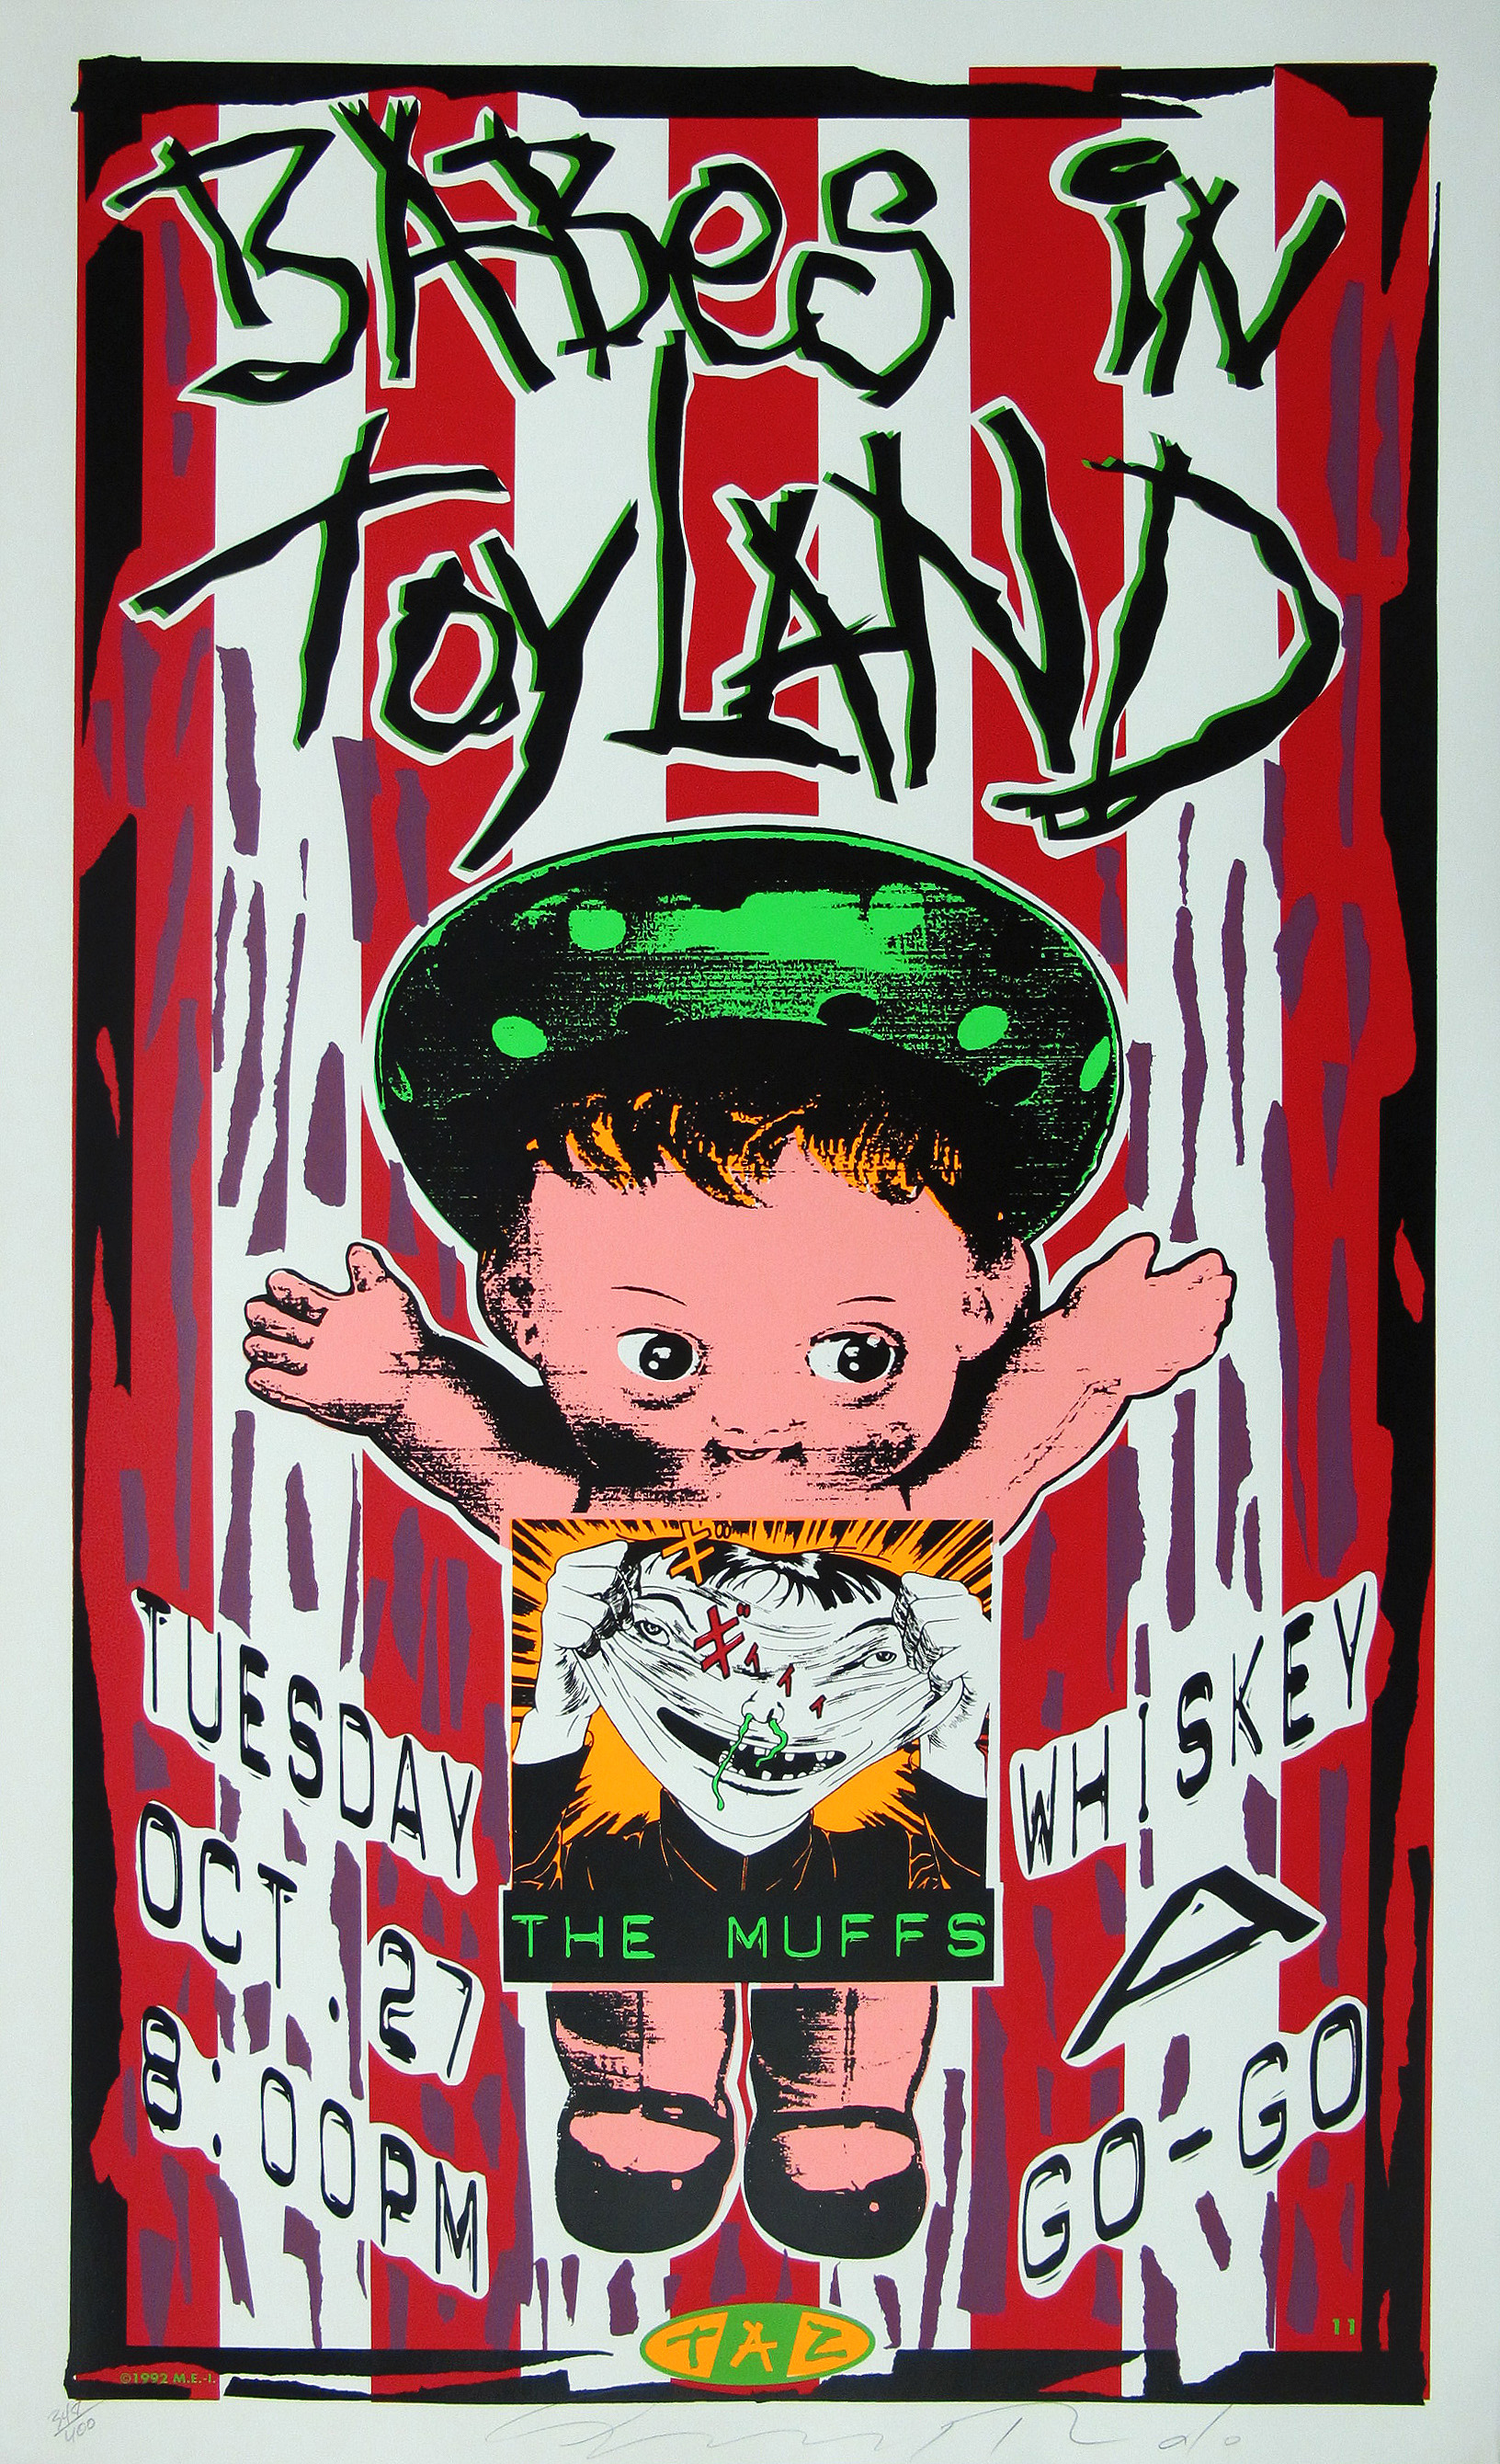 Babes In Toyland & The Muffs Concert Poster